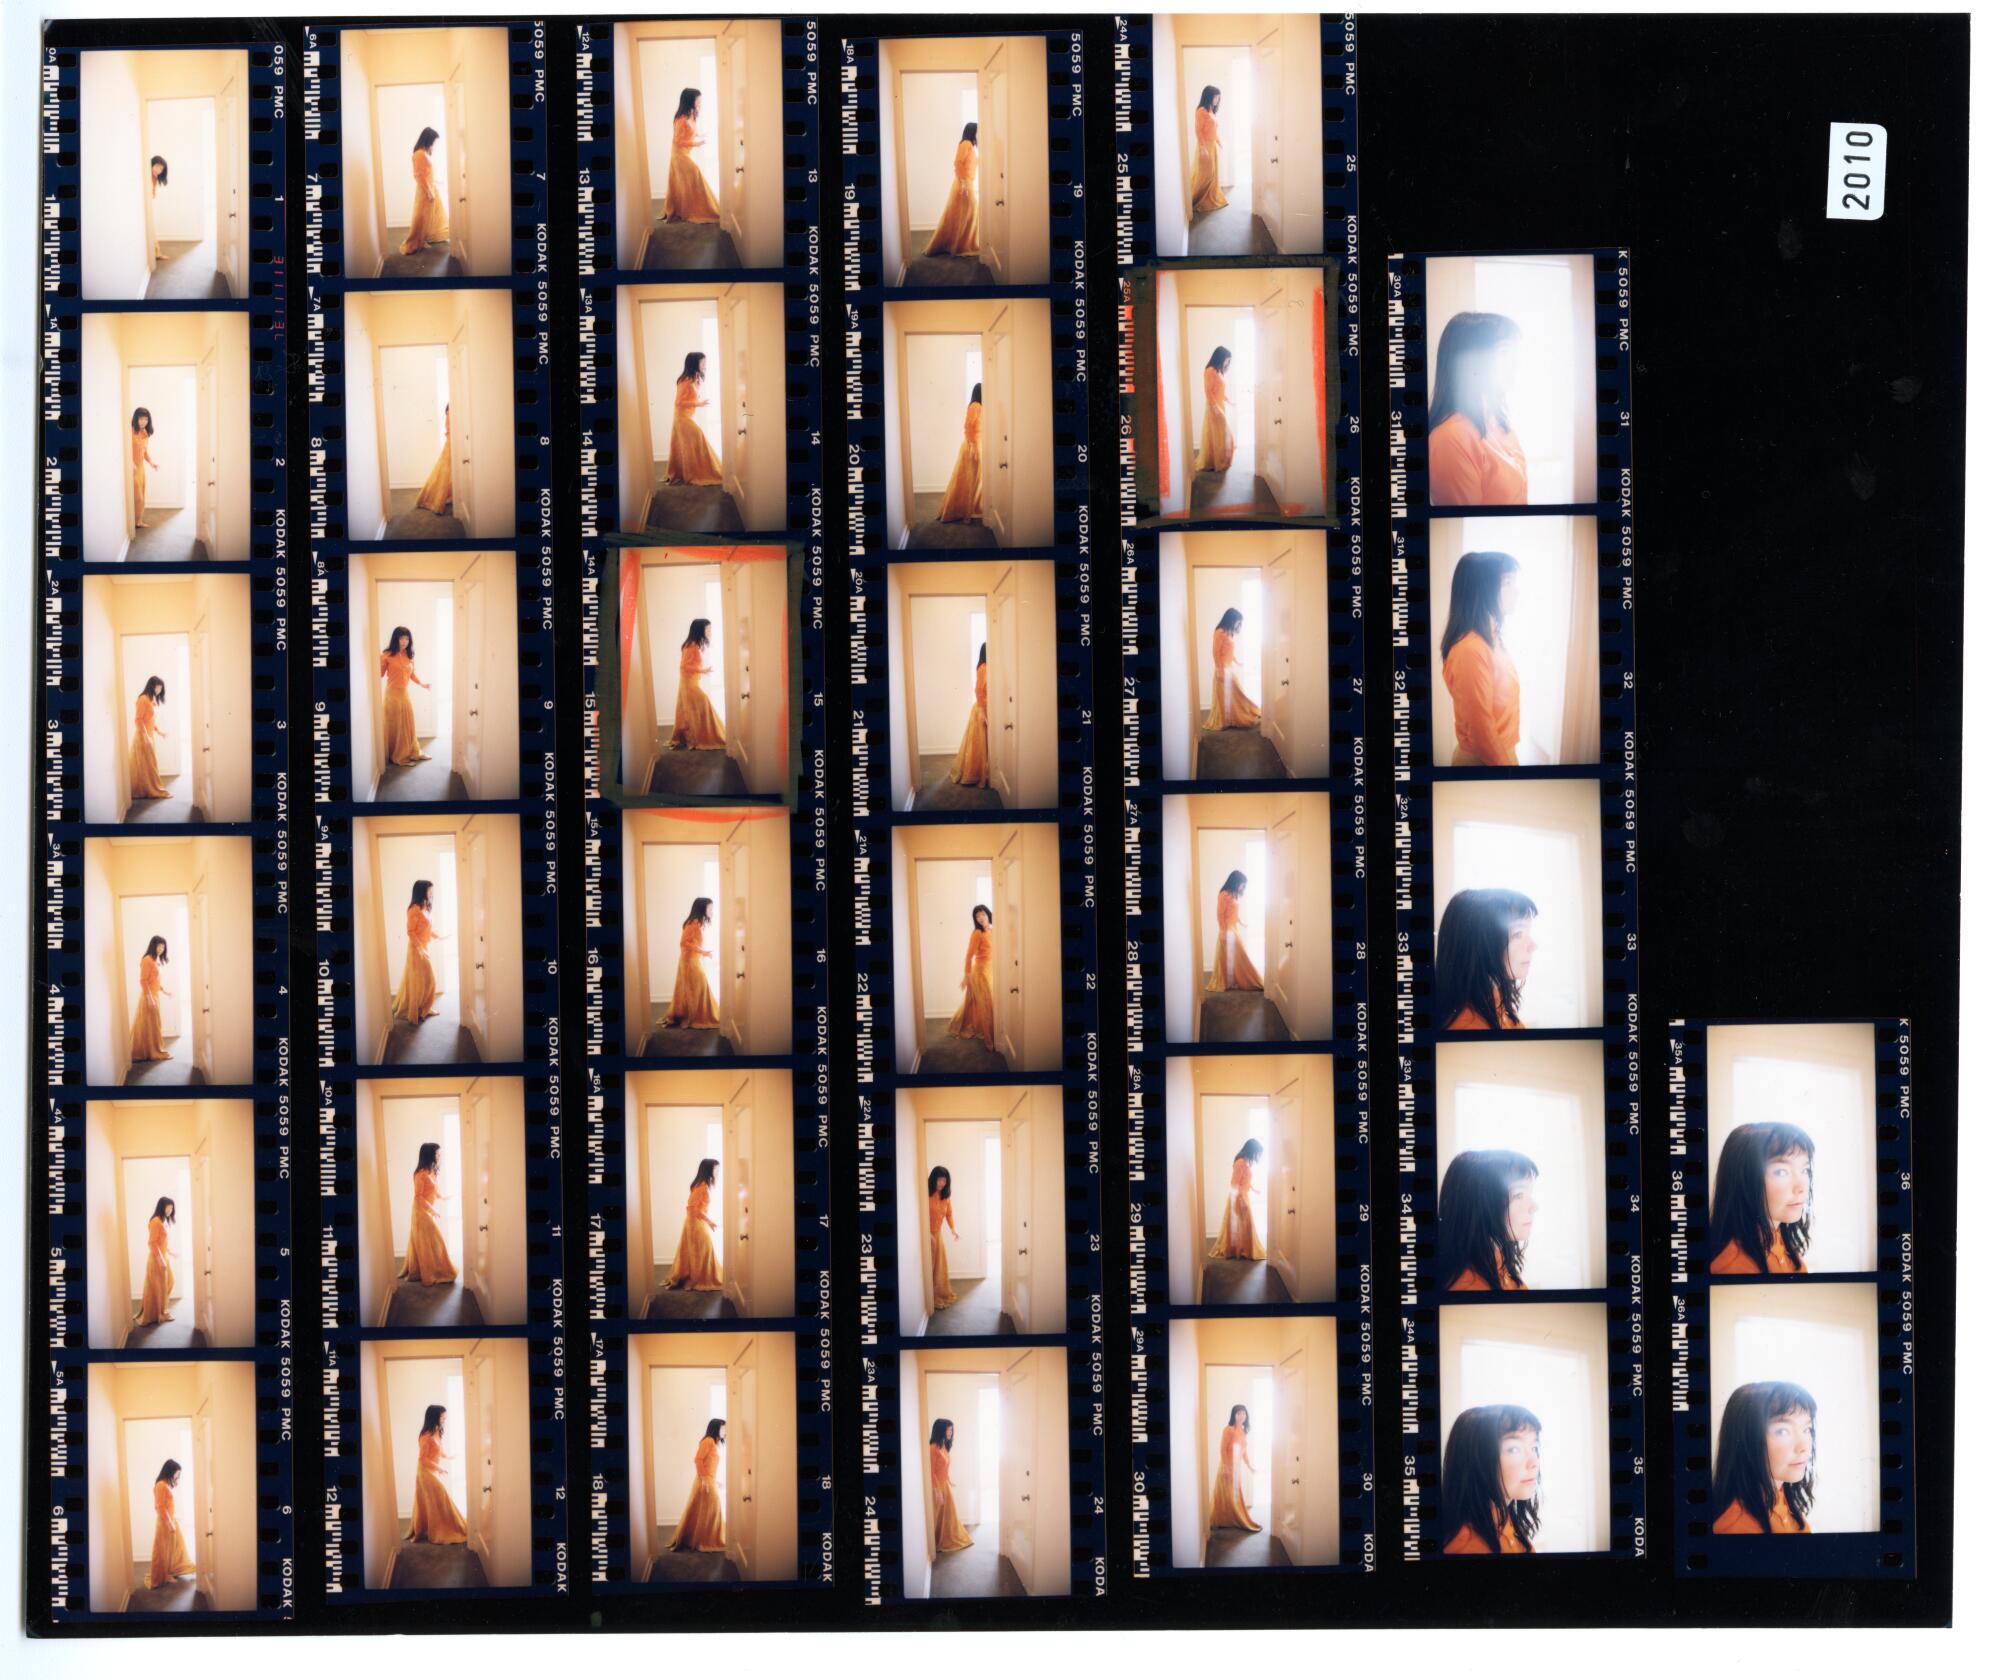 A contact sheet of photos of Björk in a hallway.